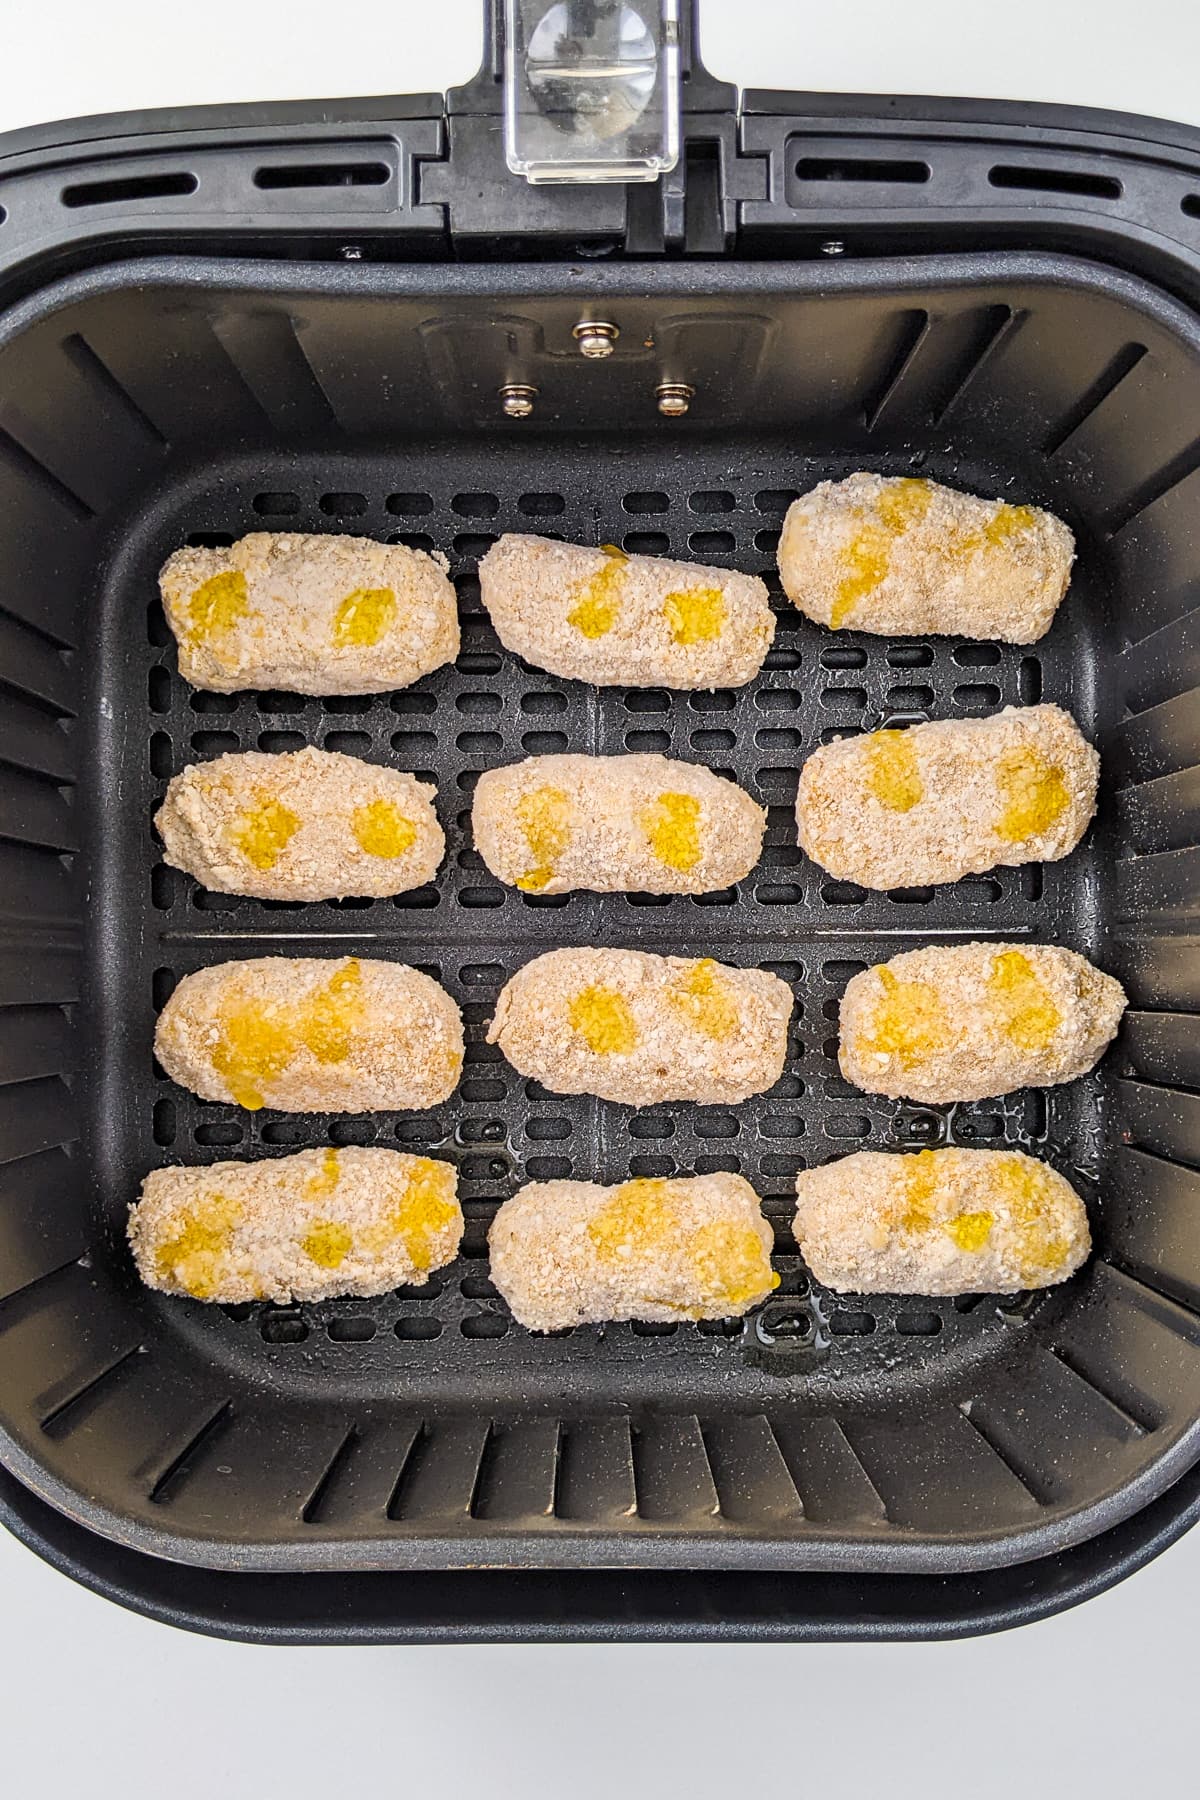 Top view of raw chili cheese nuggets in an air fryer basket.